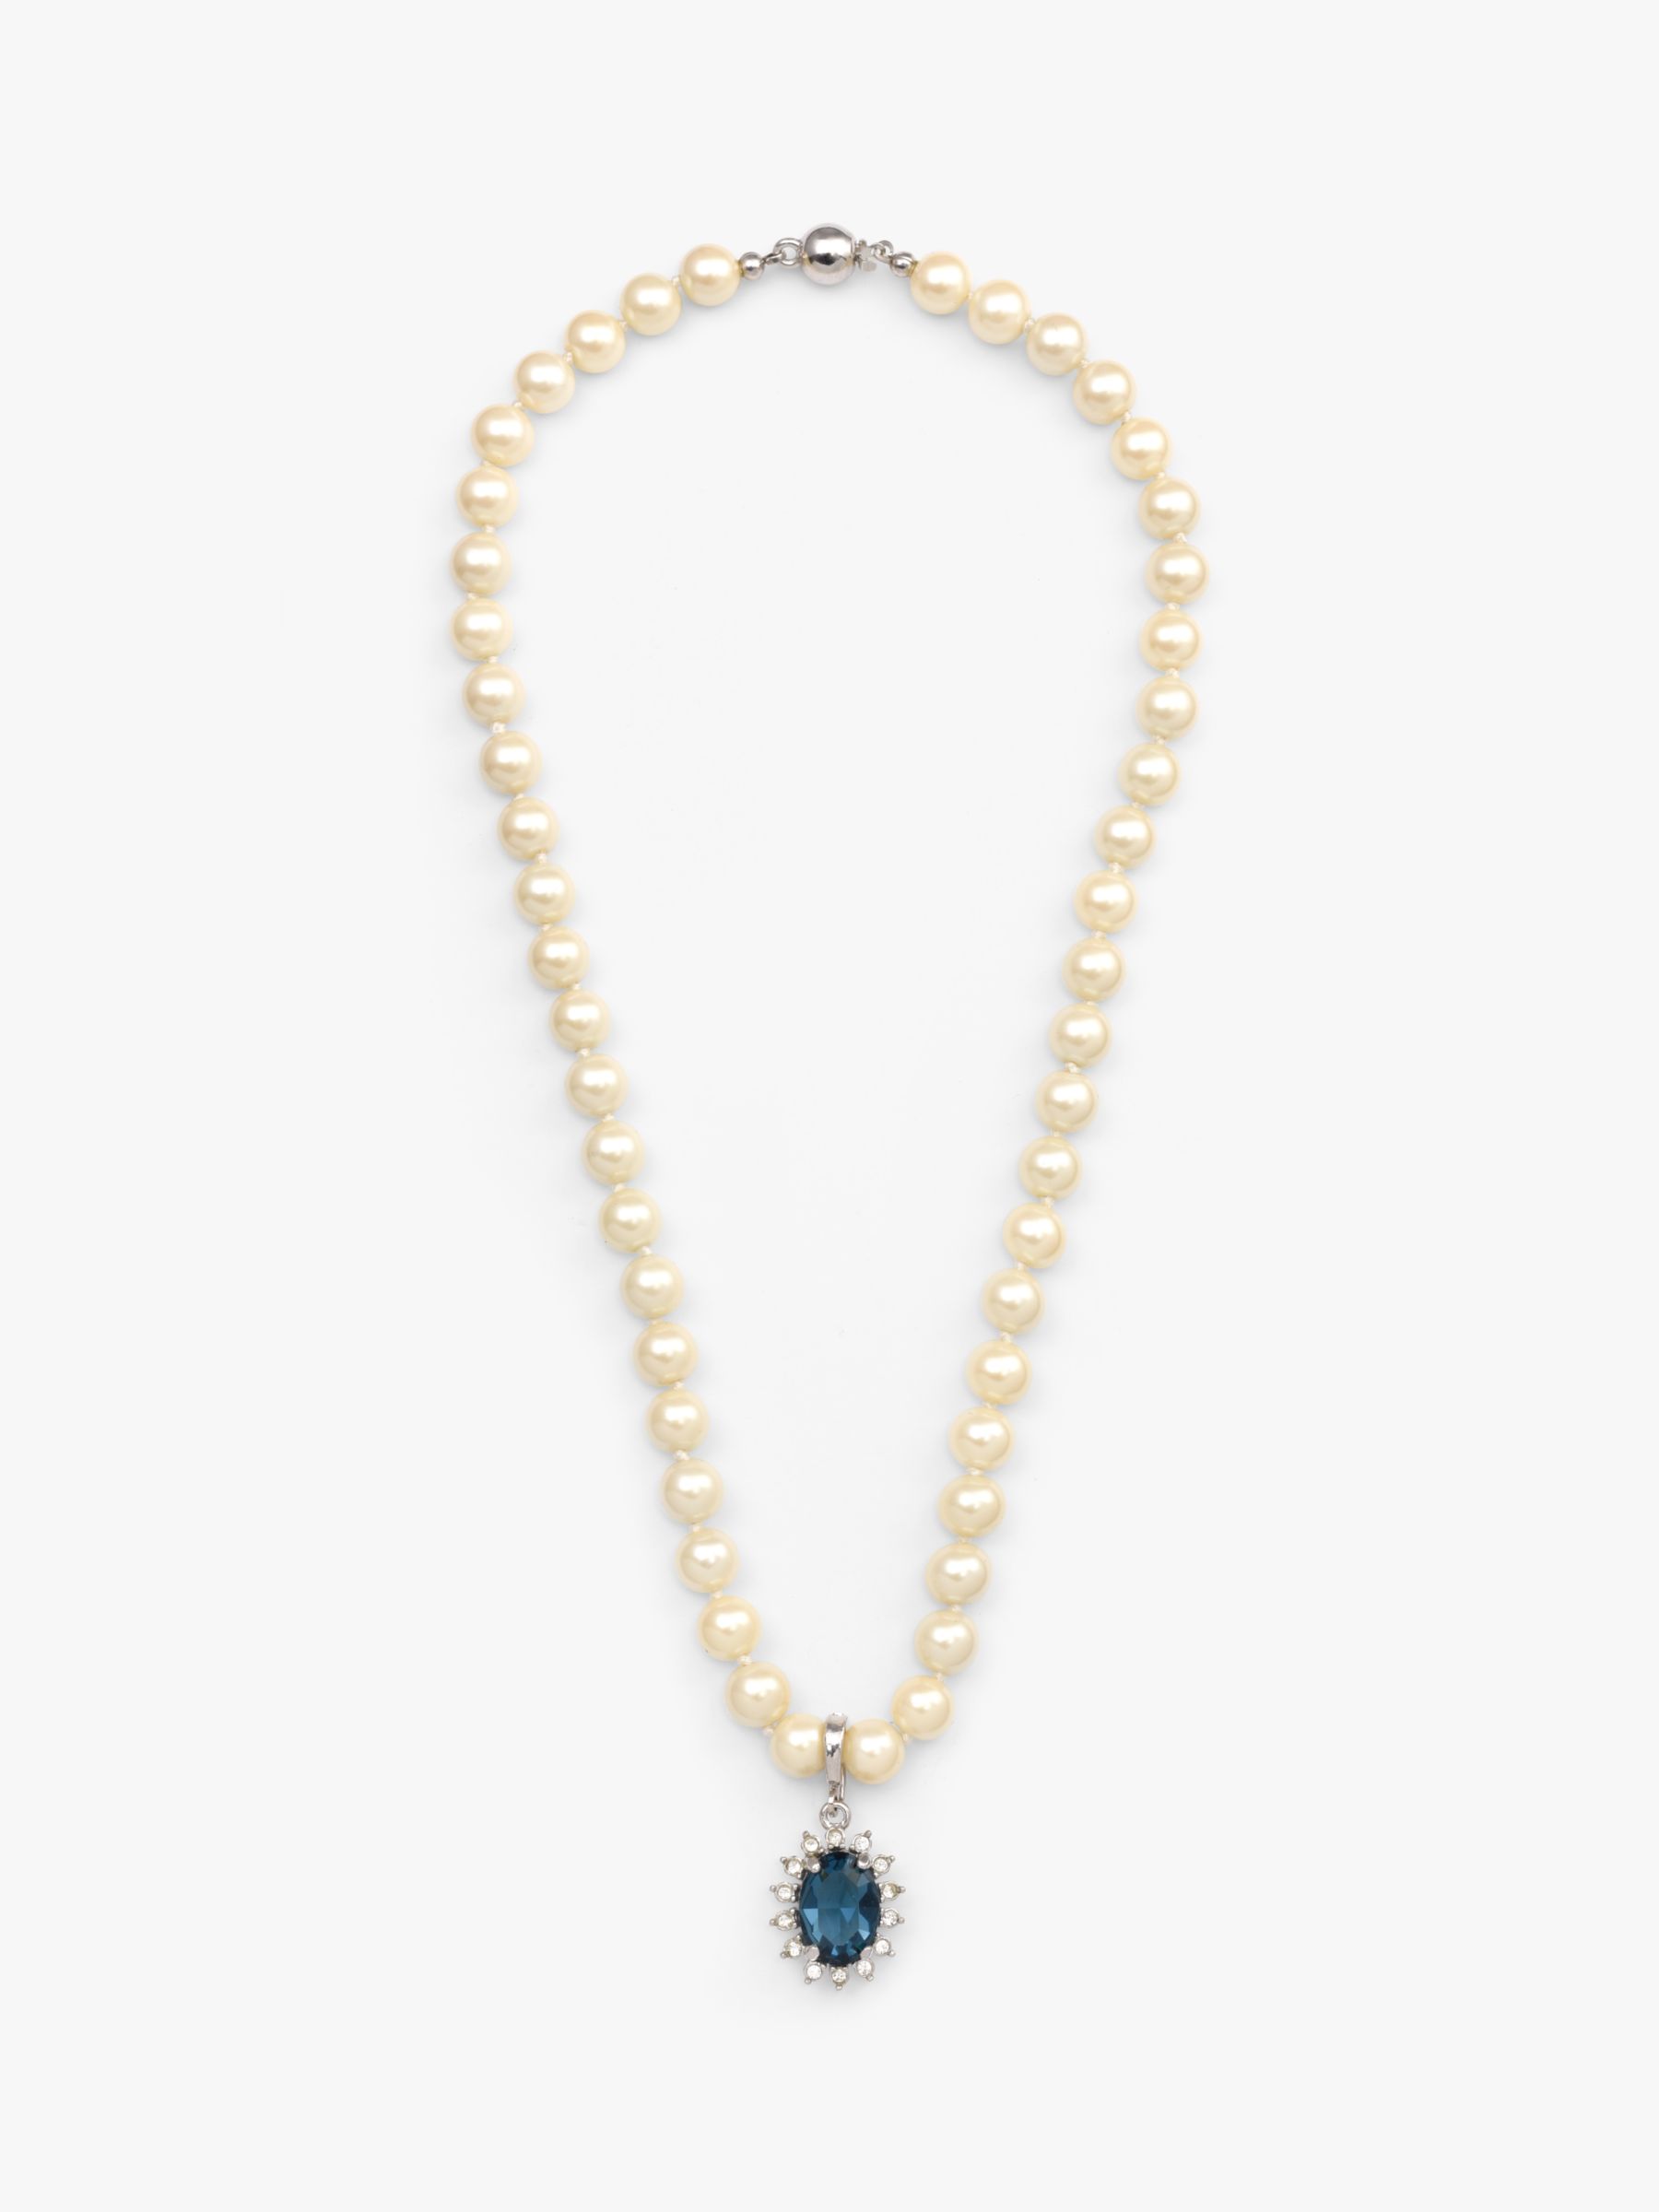 Buy Eclectica Vintage 22ct Gold Plated Faux Pearl and Swarovski Crystal Pendant Necklace, Dated Circa 1980s Online at johnlewis.com